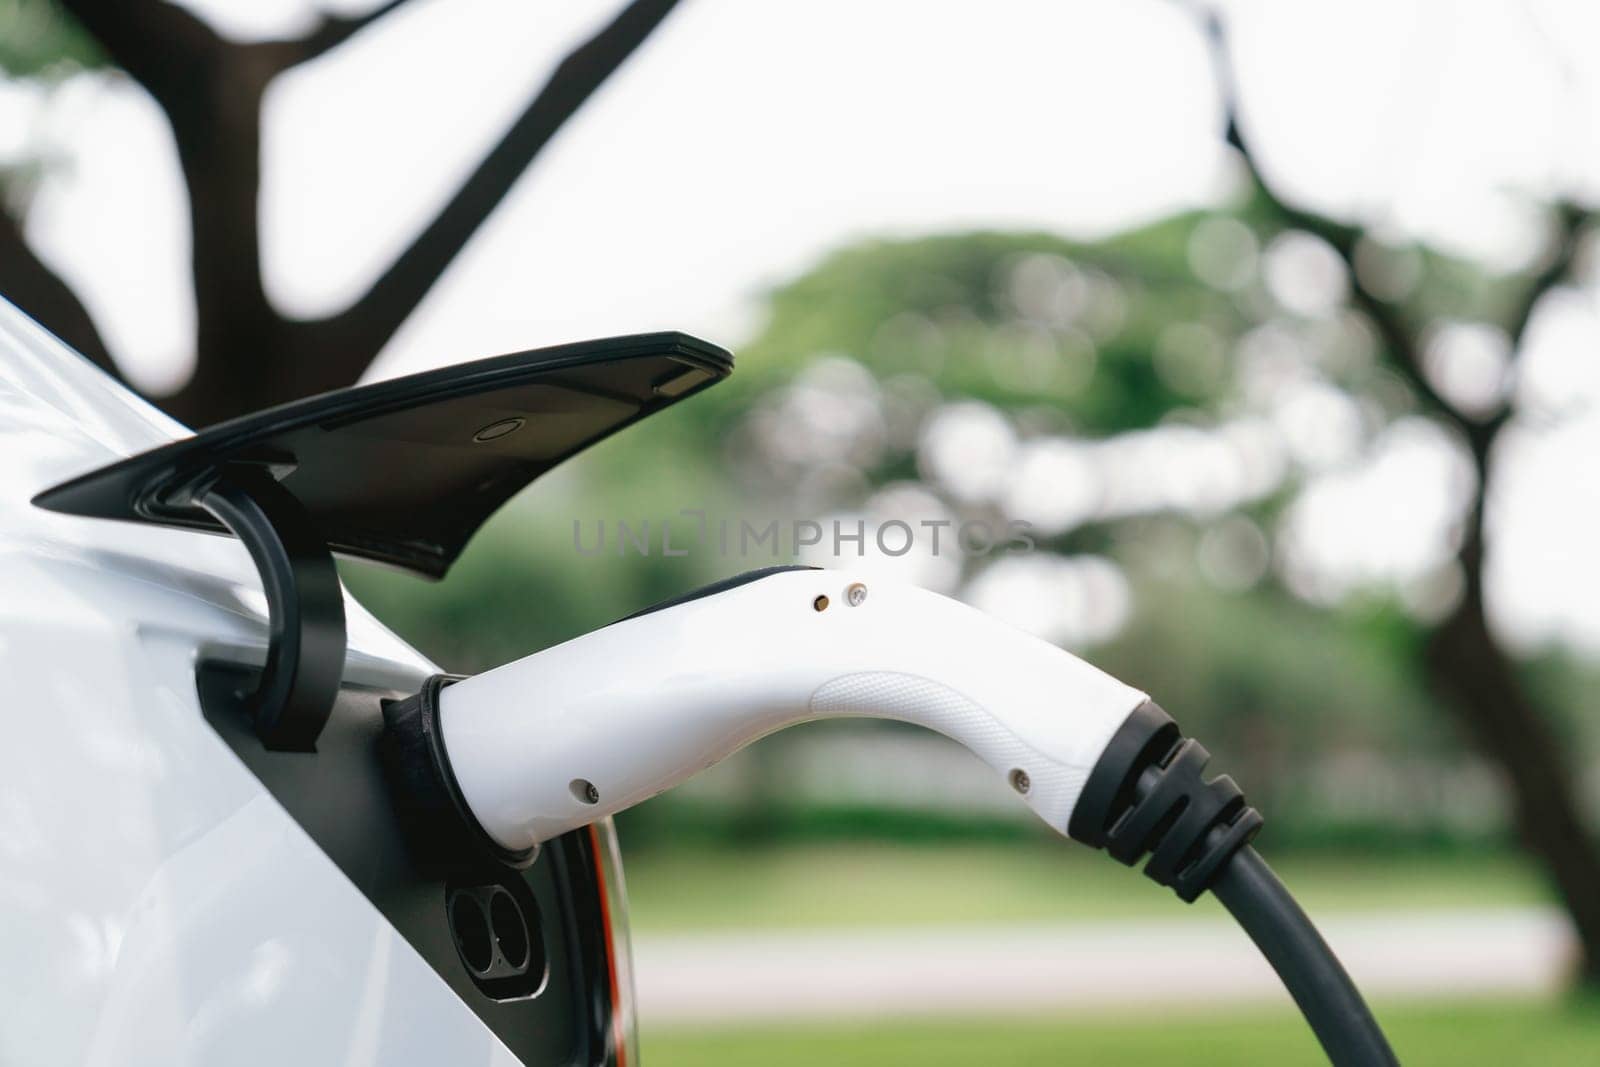 EV electric vehicle recharging battery from EV charging station in outdoor green city park scenic. Natural protection with eco friendly EV car travel. Exalt